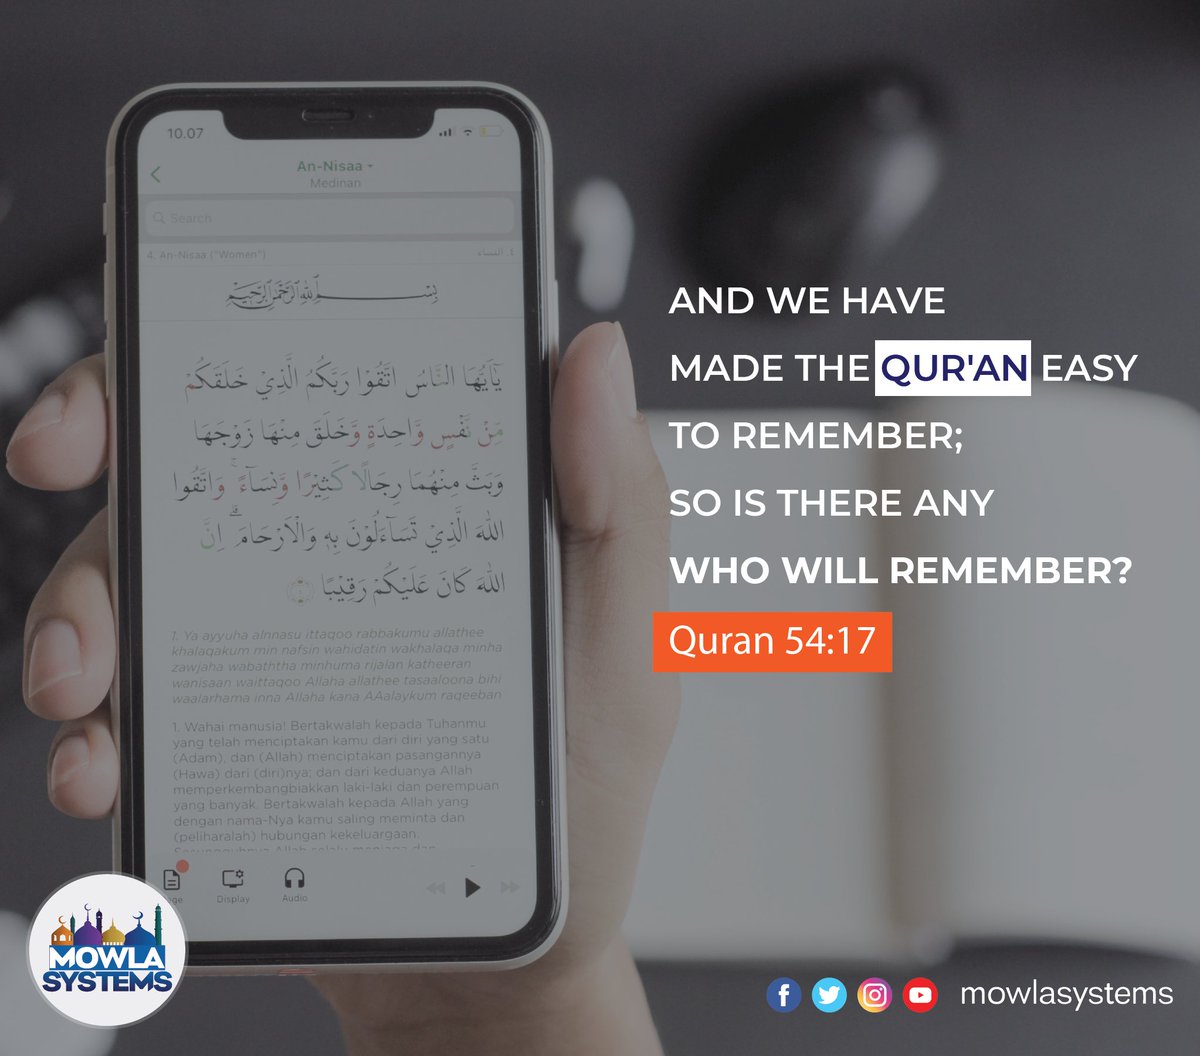 The Quran - A Reminder for the Mind and Soul.

#Quranreminders #Quran5417 #Islamicreminders #reminderforthesoul #reminderforthemind #Quranicteachings #reflection #contemplation #Muslims #blessingsoftheQuran #mowlaSystems #masjid_management_system #masjid_mobile_app